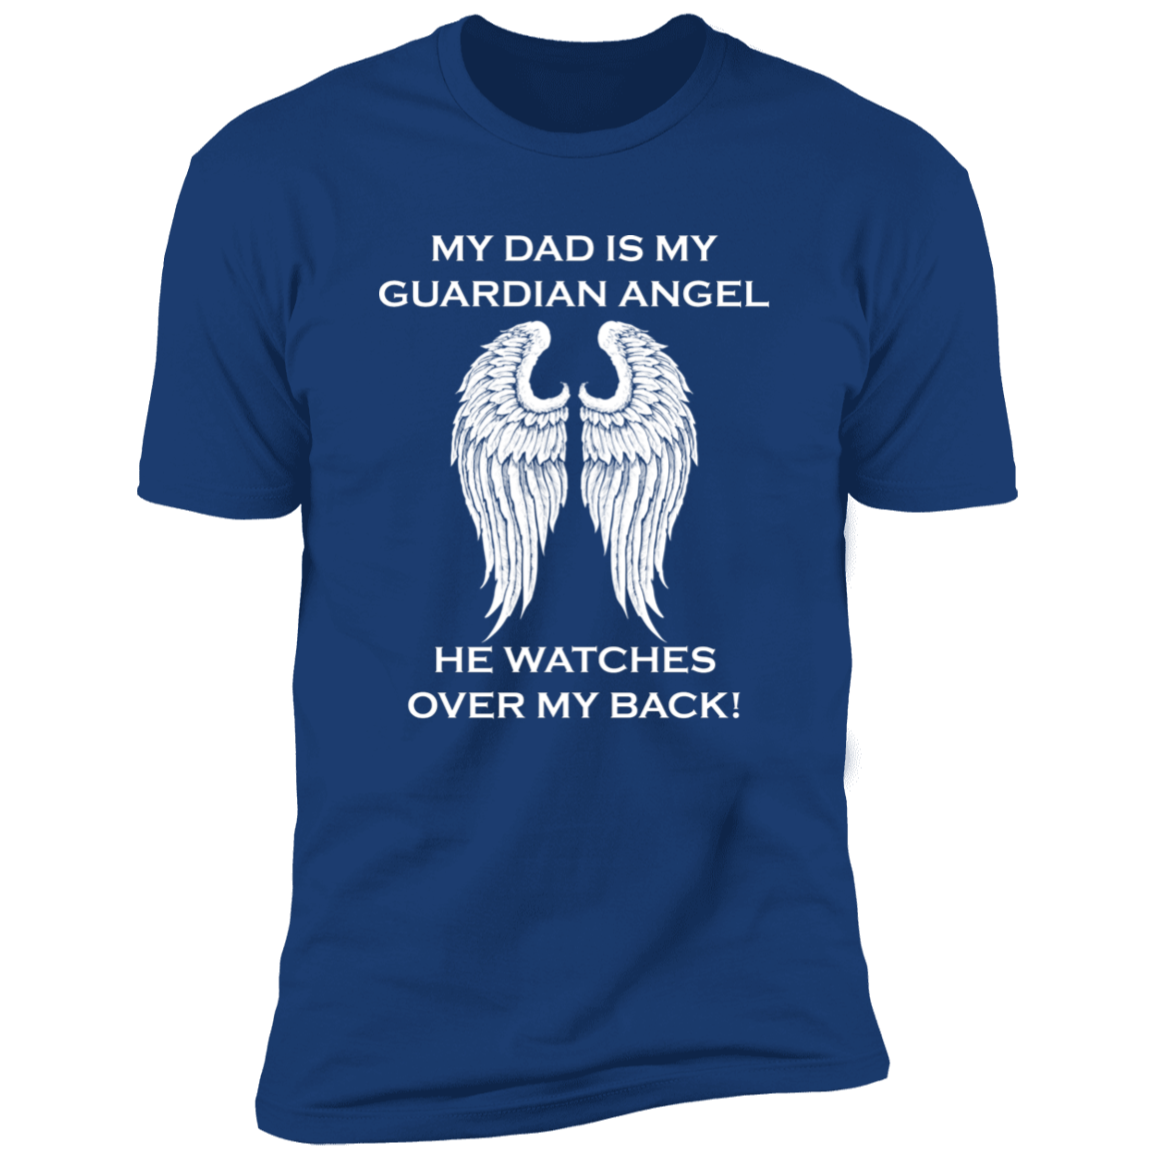 My Dad Is My Guardian Angel T-Shirt